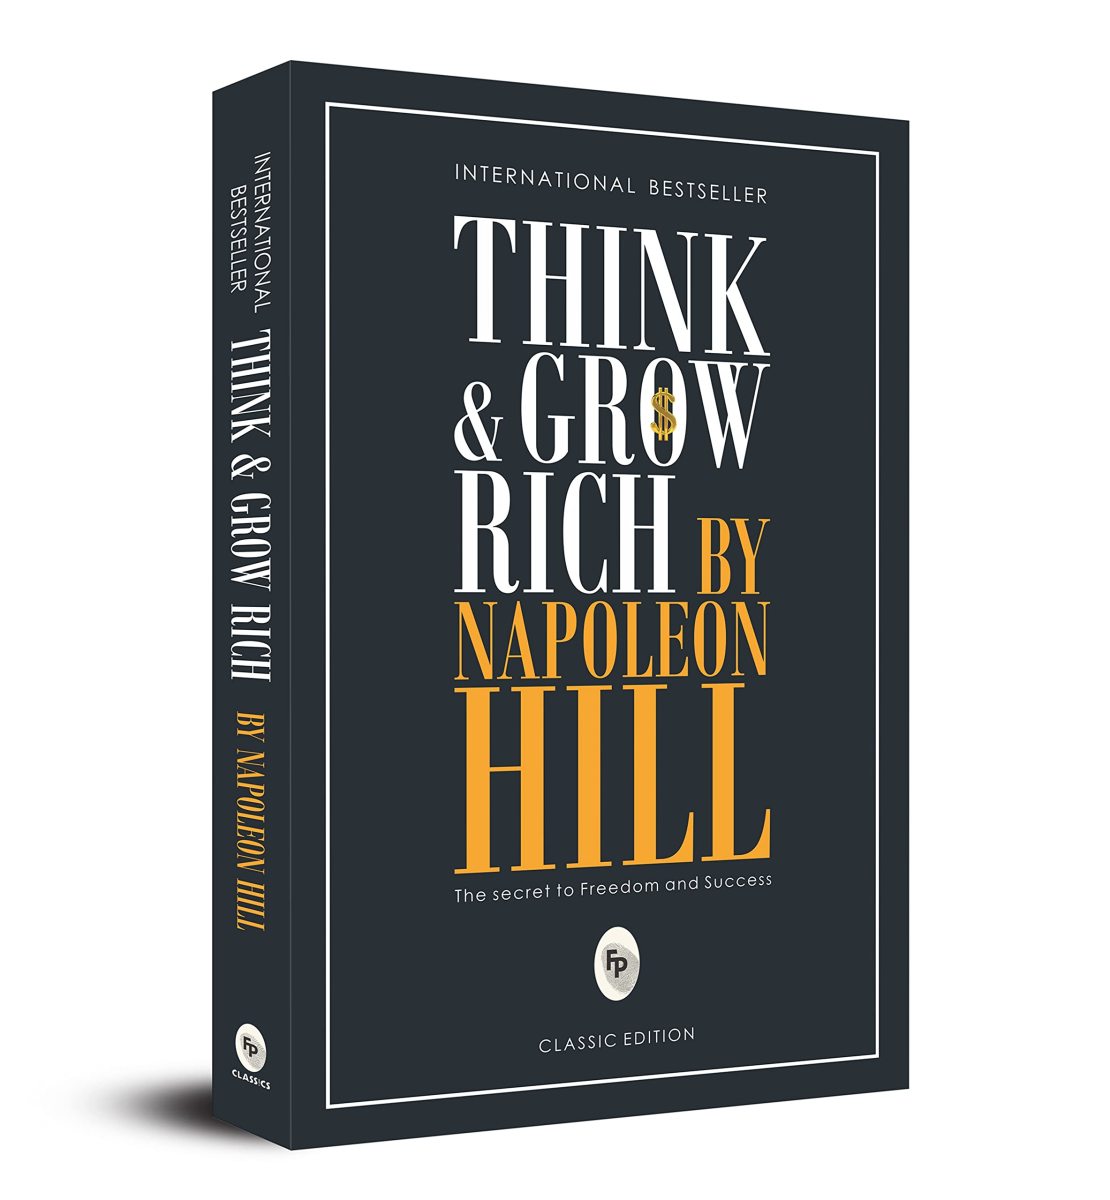 Read This Book to Build the Right Mental Model for Generating Wealth